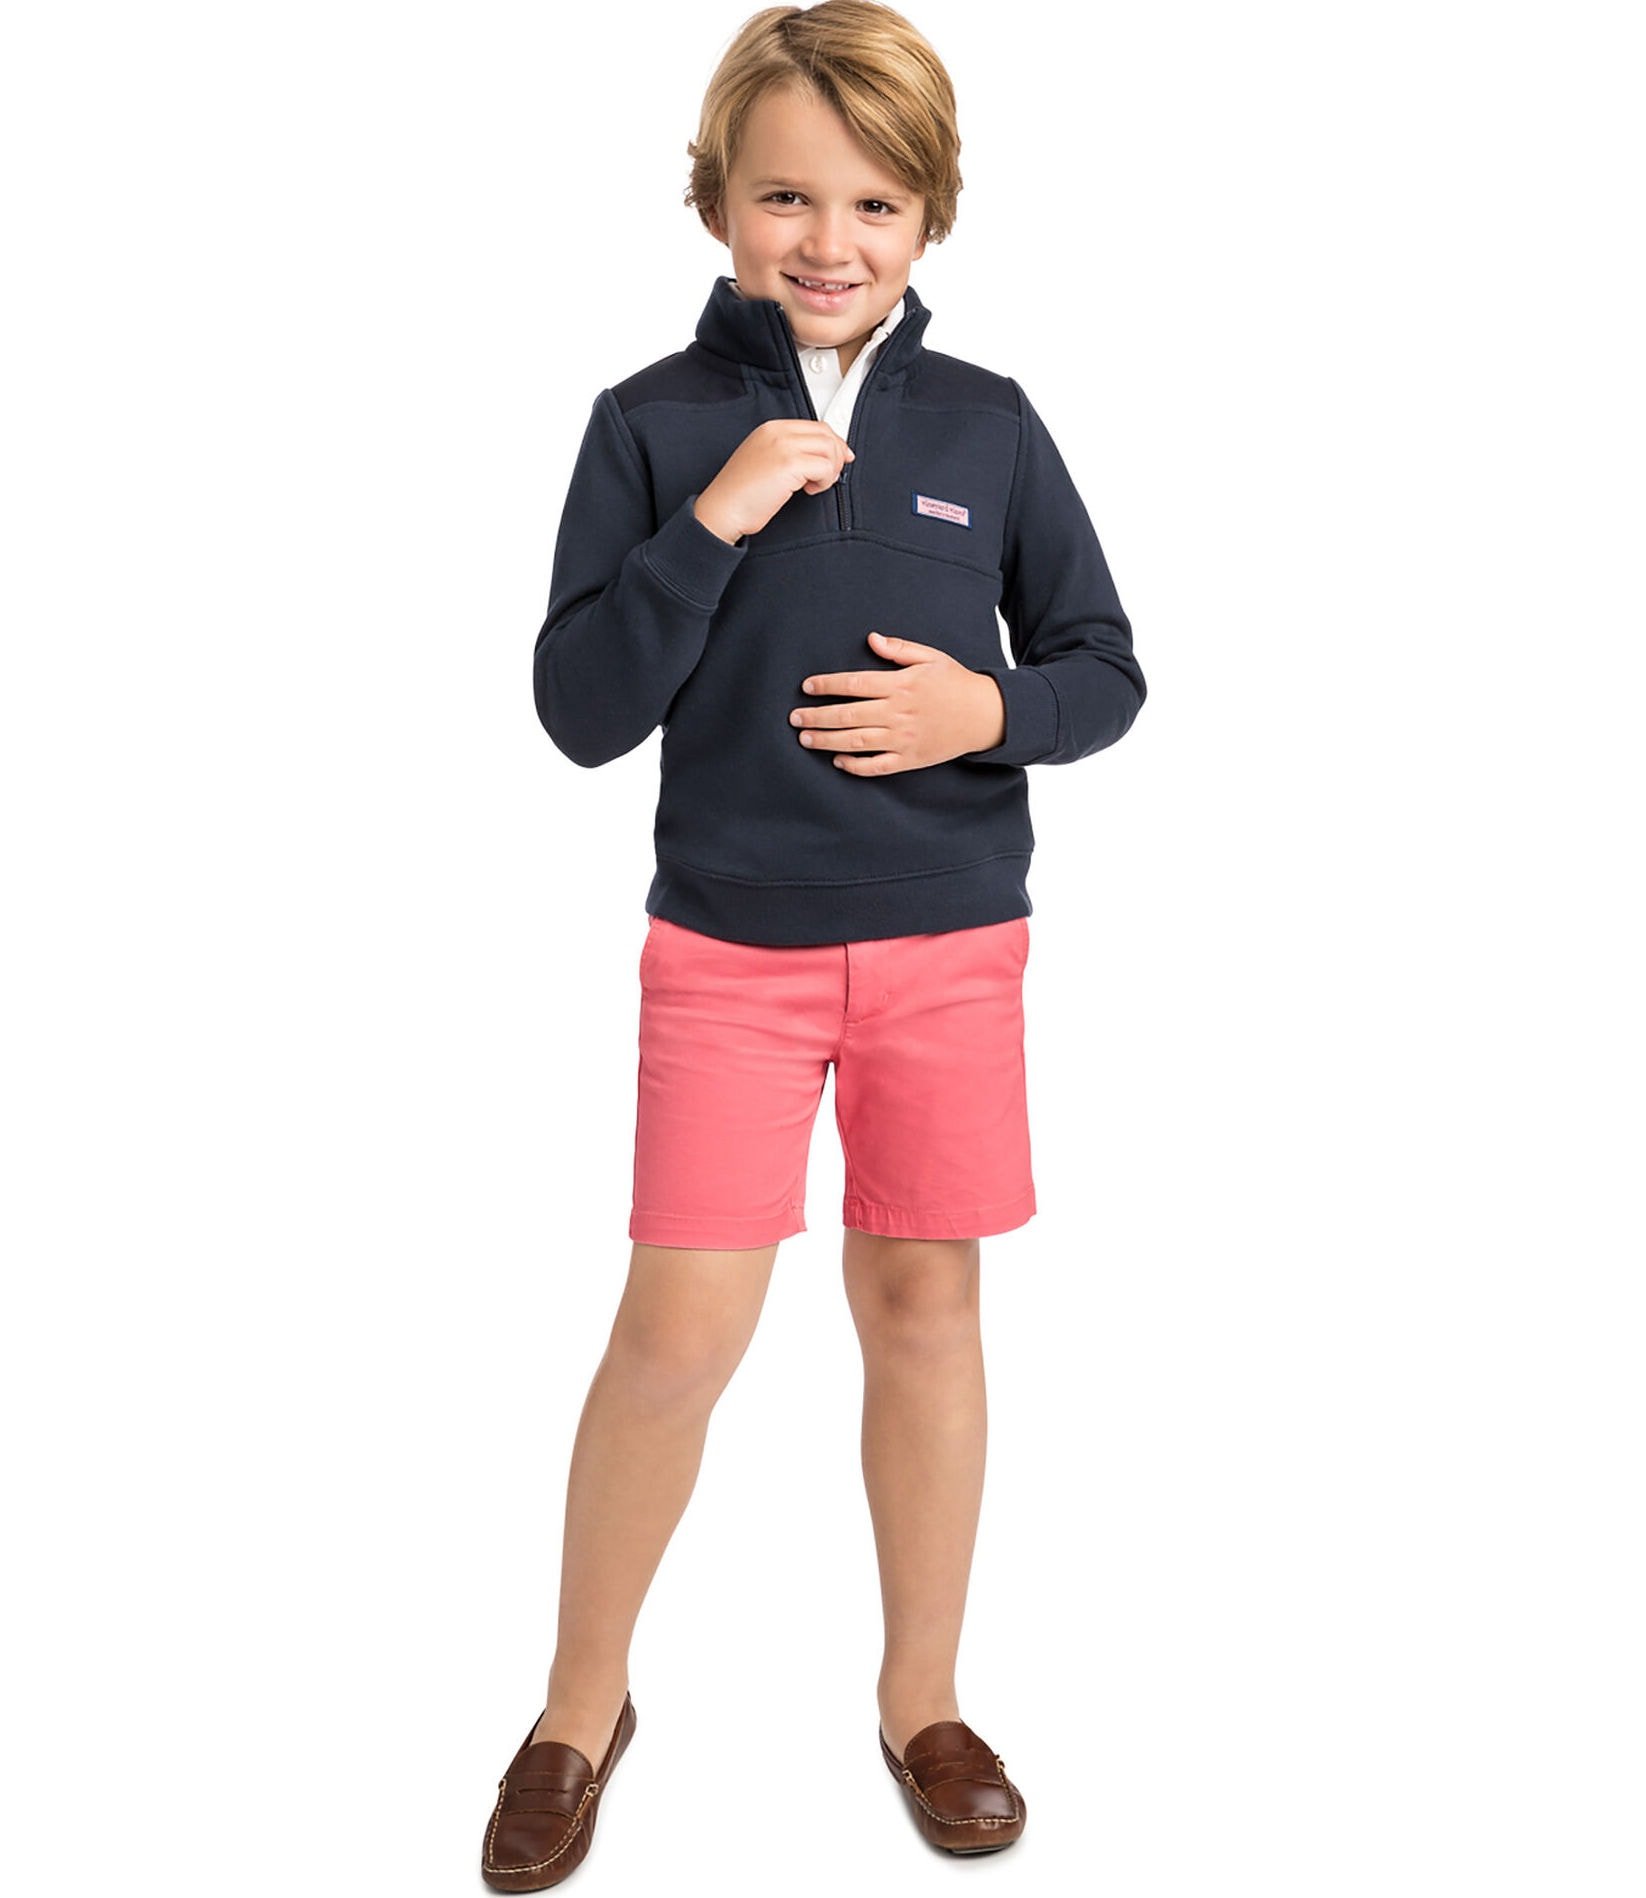 Best Brands for Boy Clothes